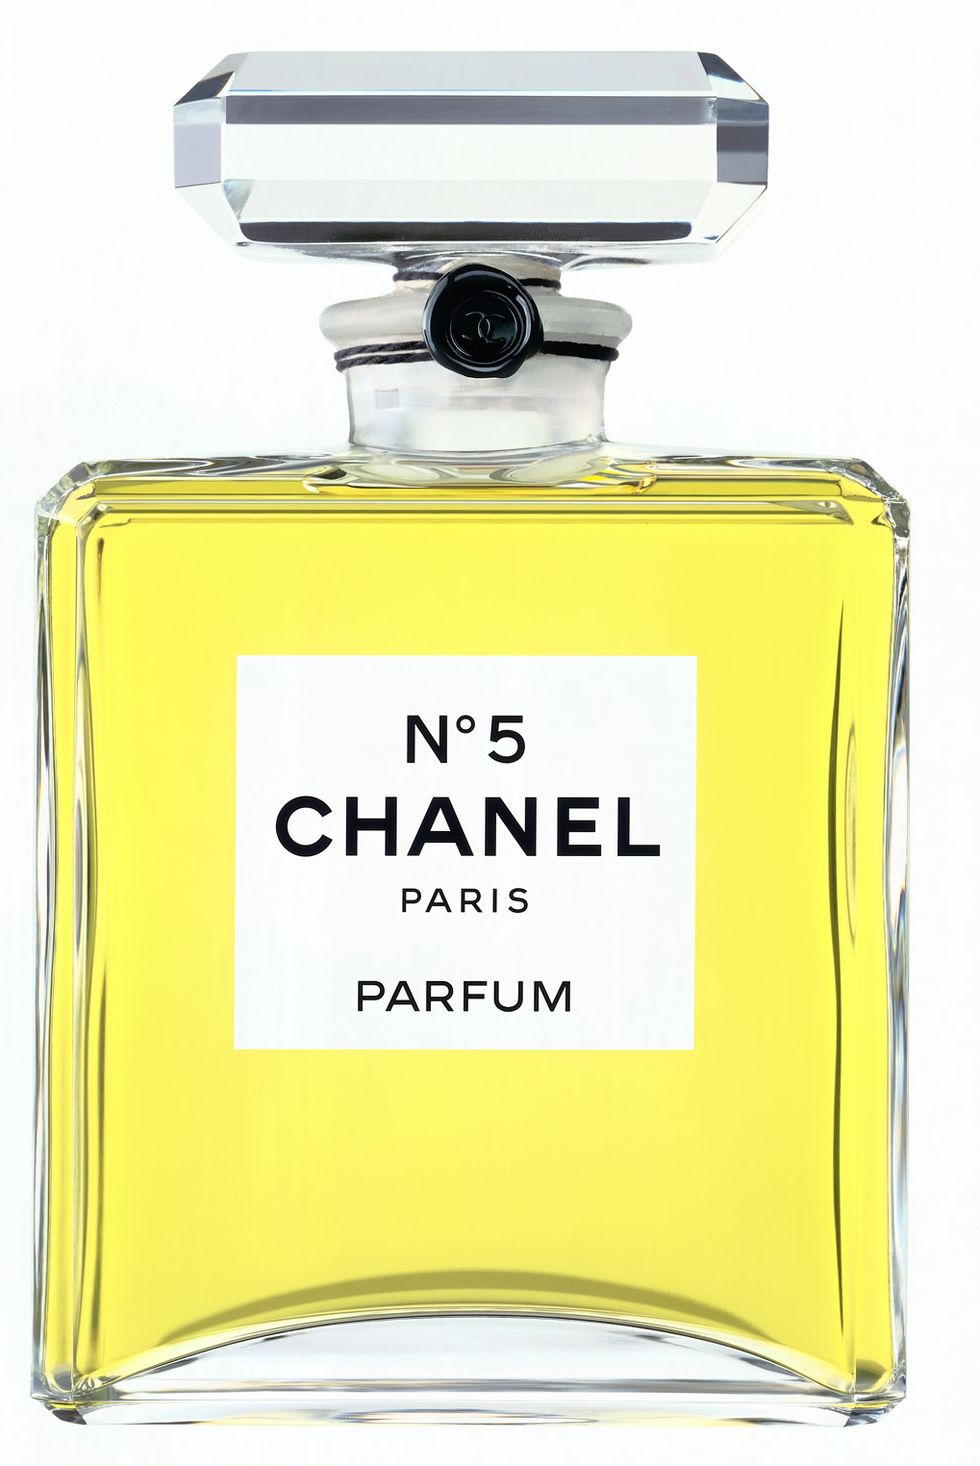 Chanel No5: The history of the iconic perfume